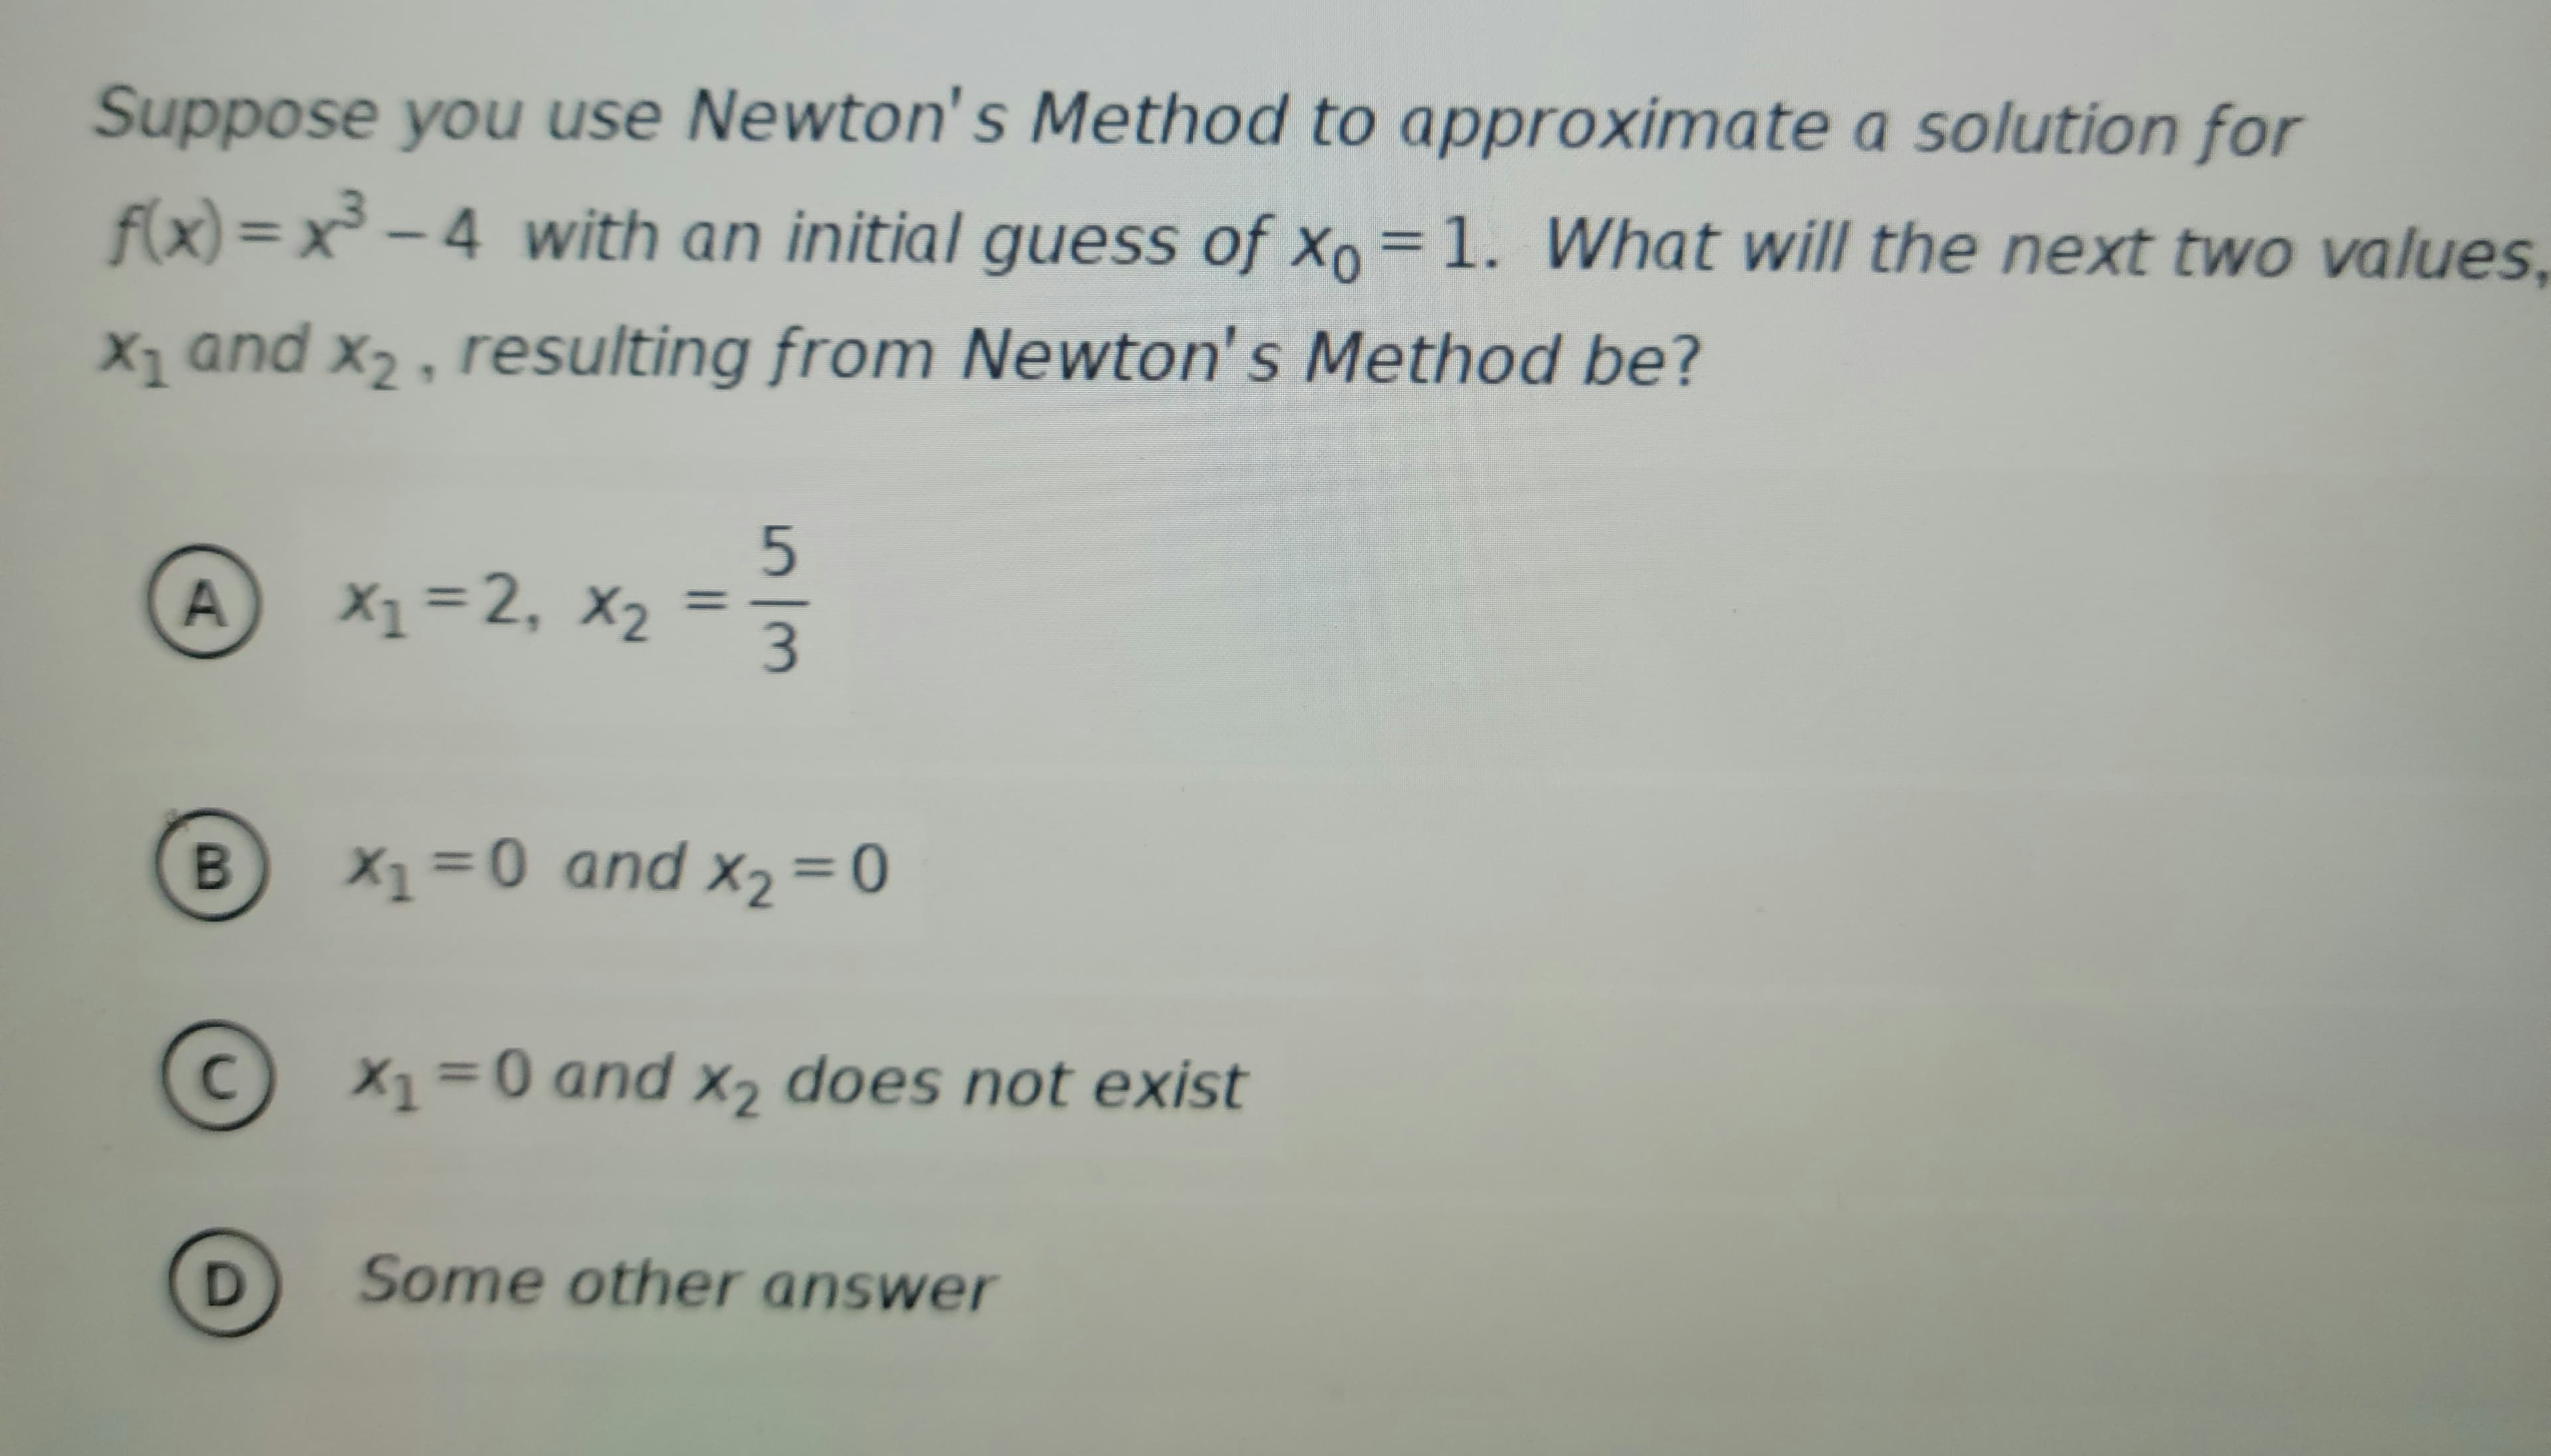 Suppose you use Newton's Method to approximate a solution for
f(x)=x³-4 with an initial guess of Xo = 1. What will the next two values,
X₁ and X₂, resulting from Newton's Method be?
1
A
B
с
D
5
X₁=2₁ X₂ = 3
1
X2
X₁ = 0 and x₂ = 0
X2
X1
X1=0 and x₂ does not exist
Some other answer